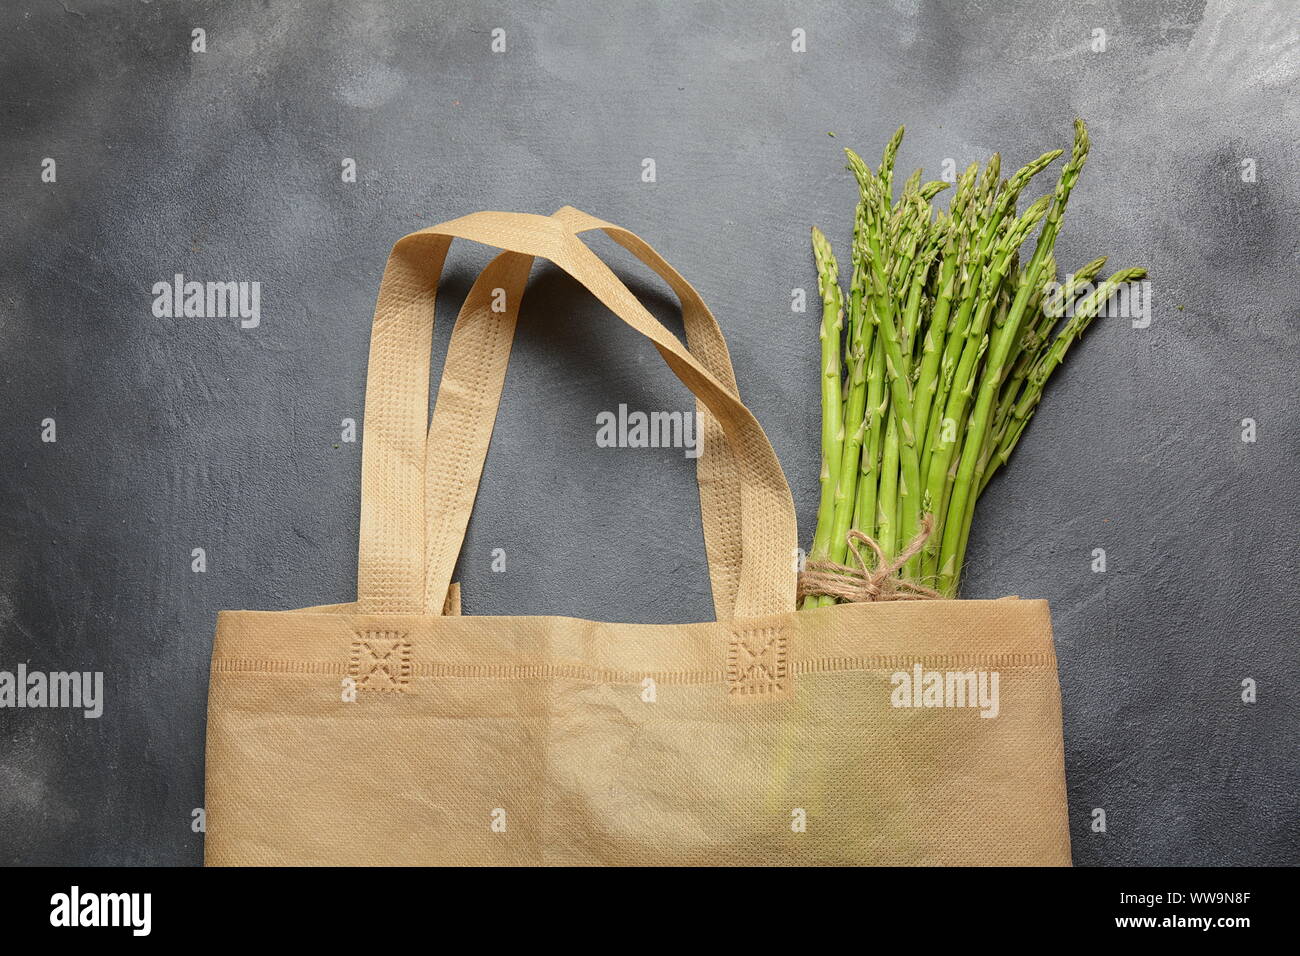 Reusable zero waste textile product bag filled with green asparagus and parsley Stock Photo